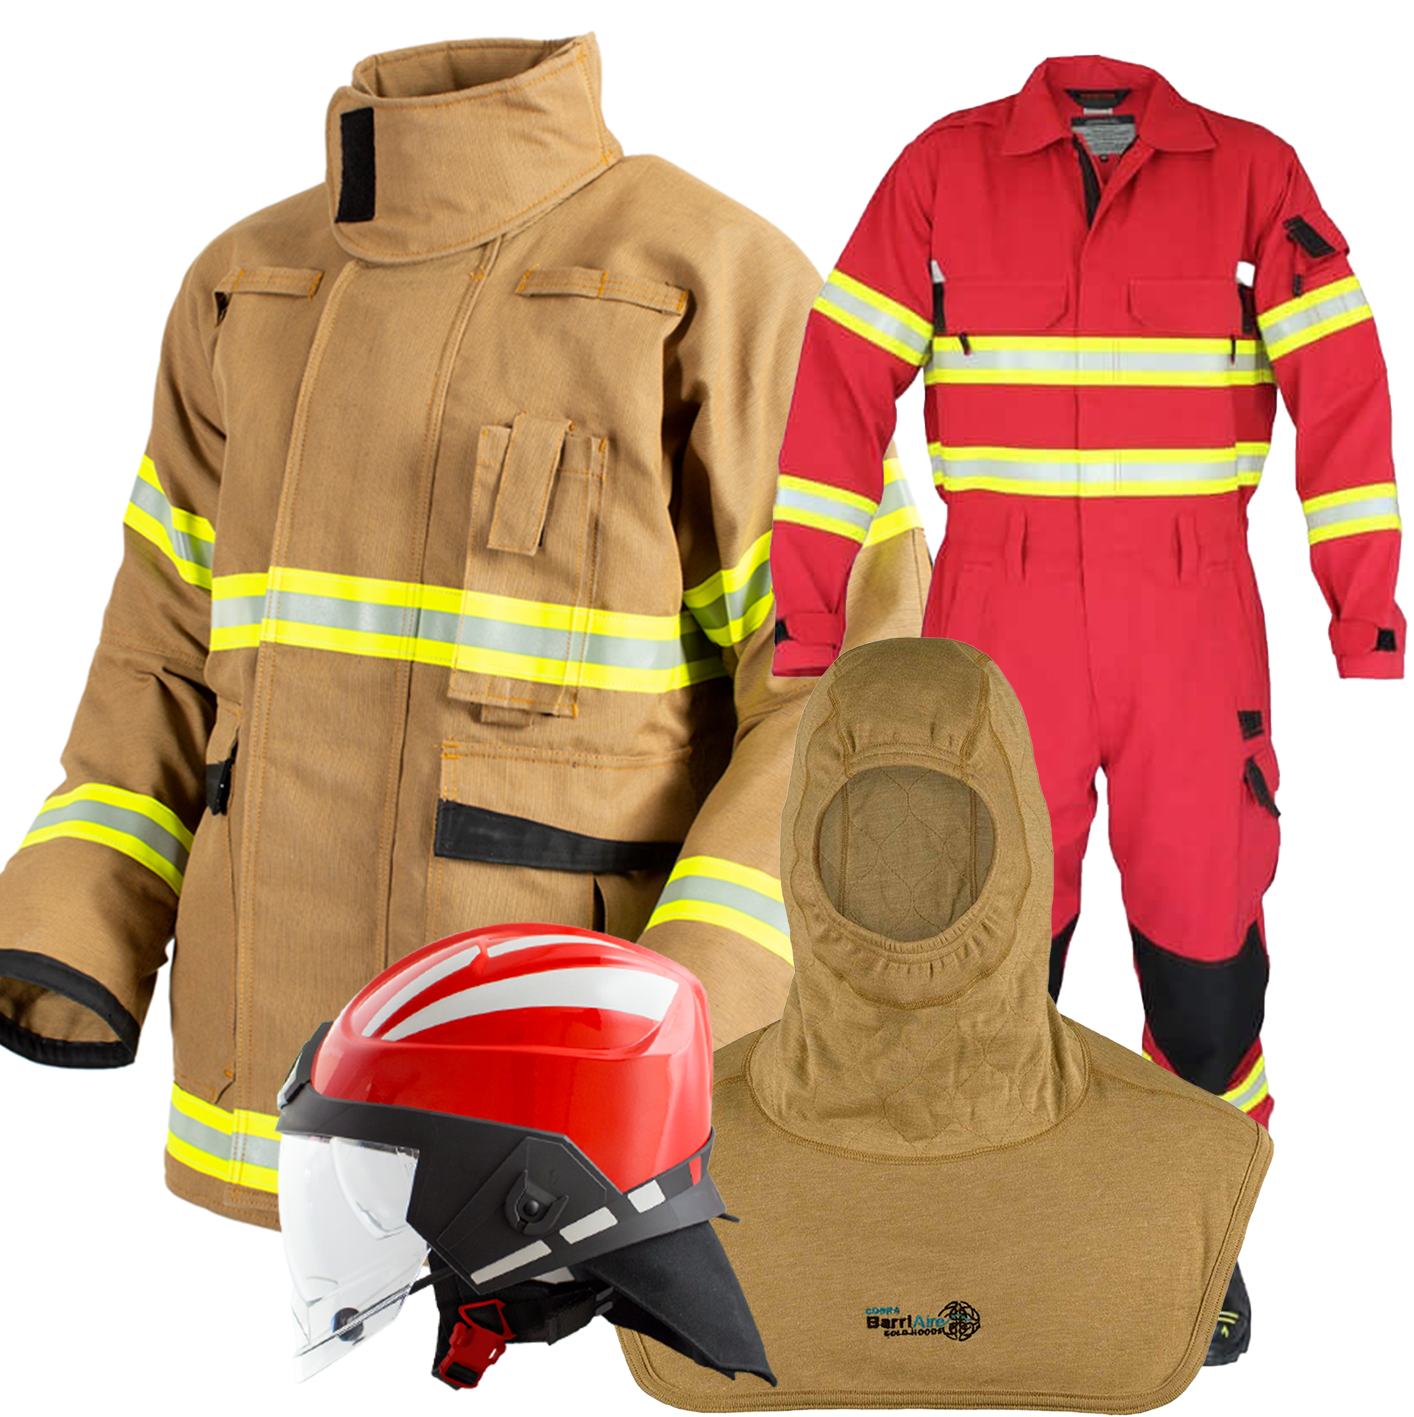 Fire / Rescue PPE - Clothing